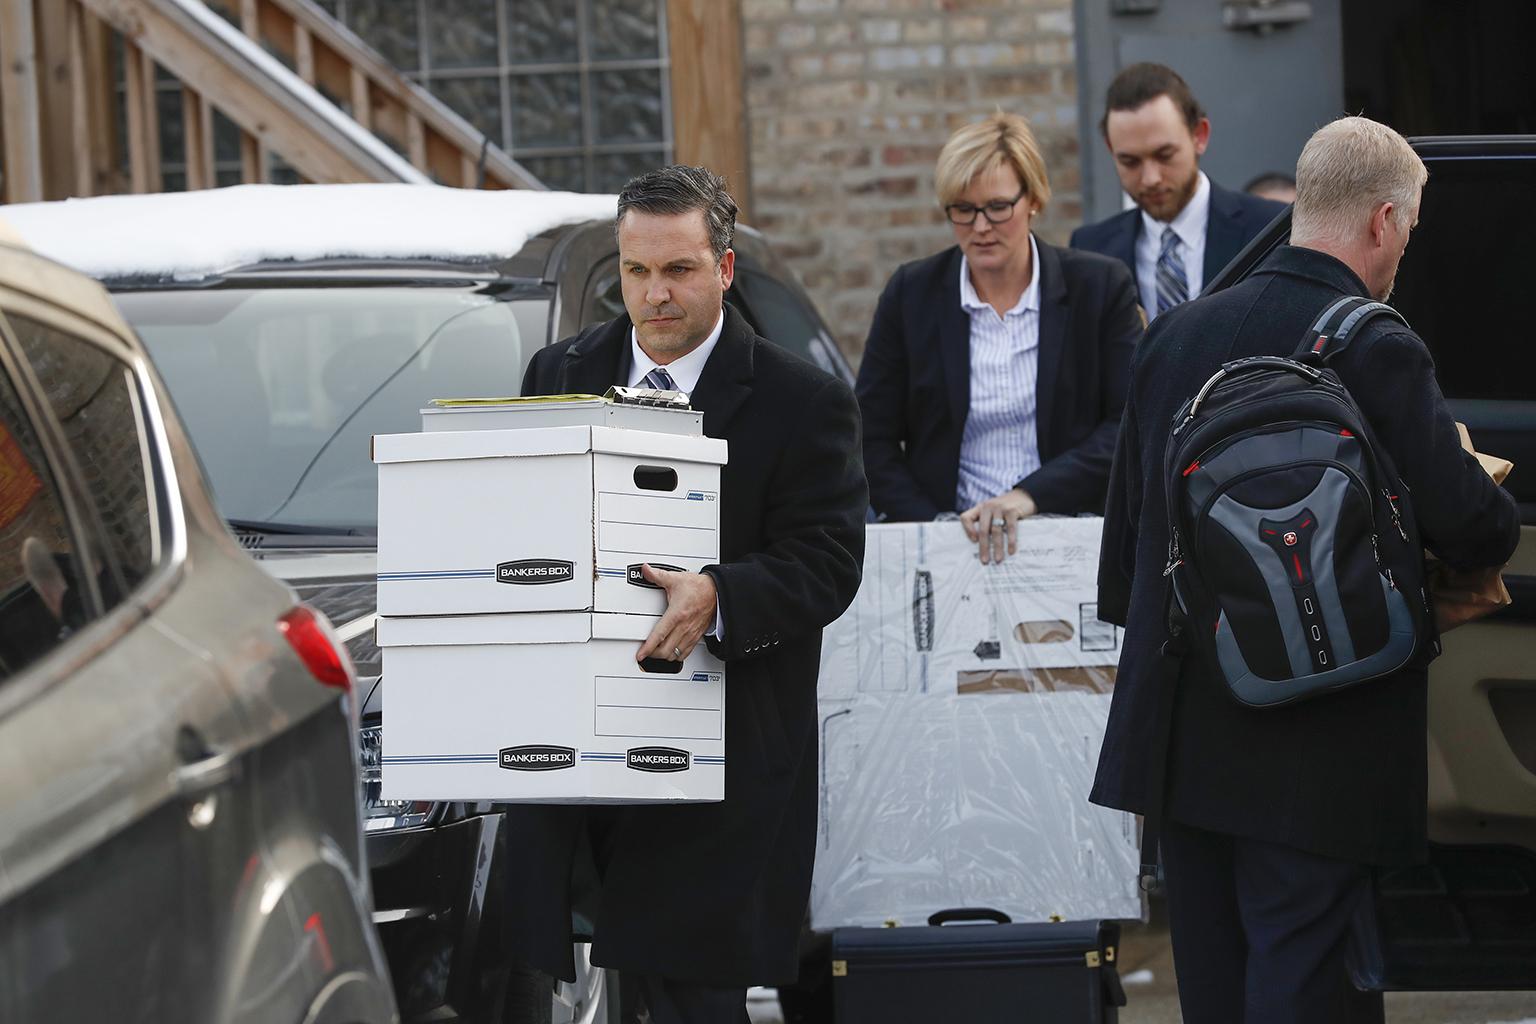 Investigators carry boxes away from Ald. Ed. Burke’s 14th Ward office on the city’s Southwest Side on Thursday, Nov. 29, 2018. (Jose M. Osorio / Chicago Tribune via AP)